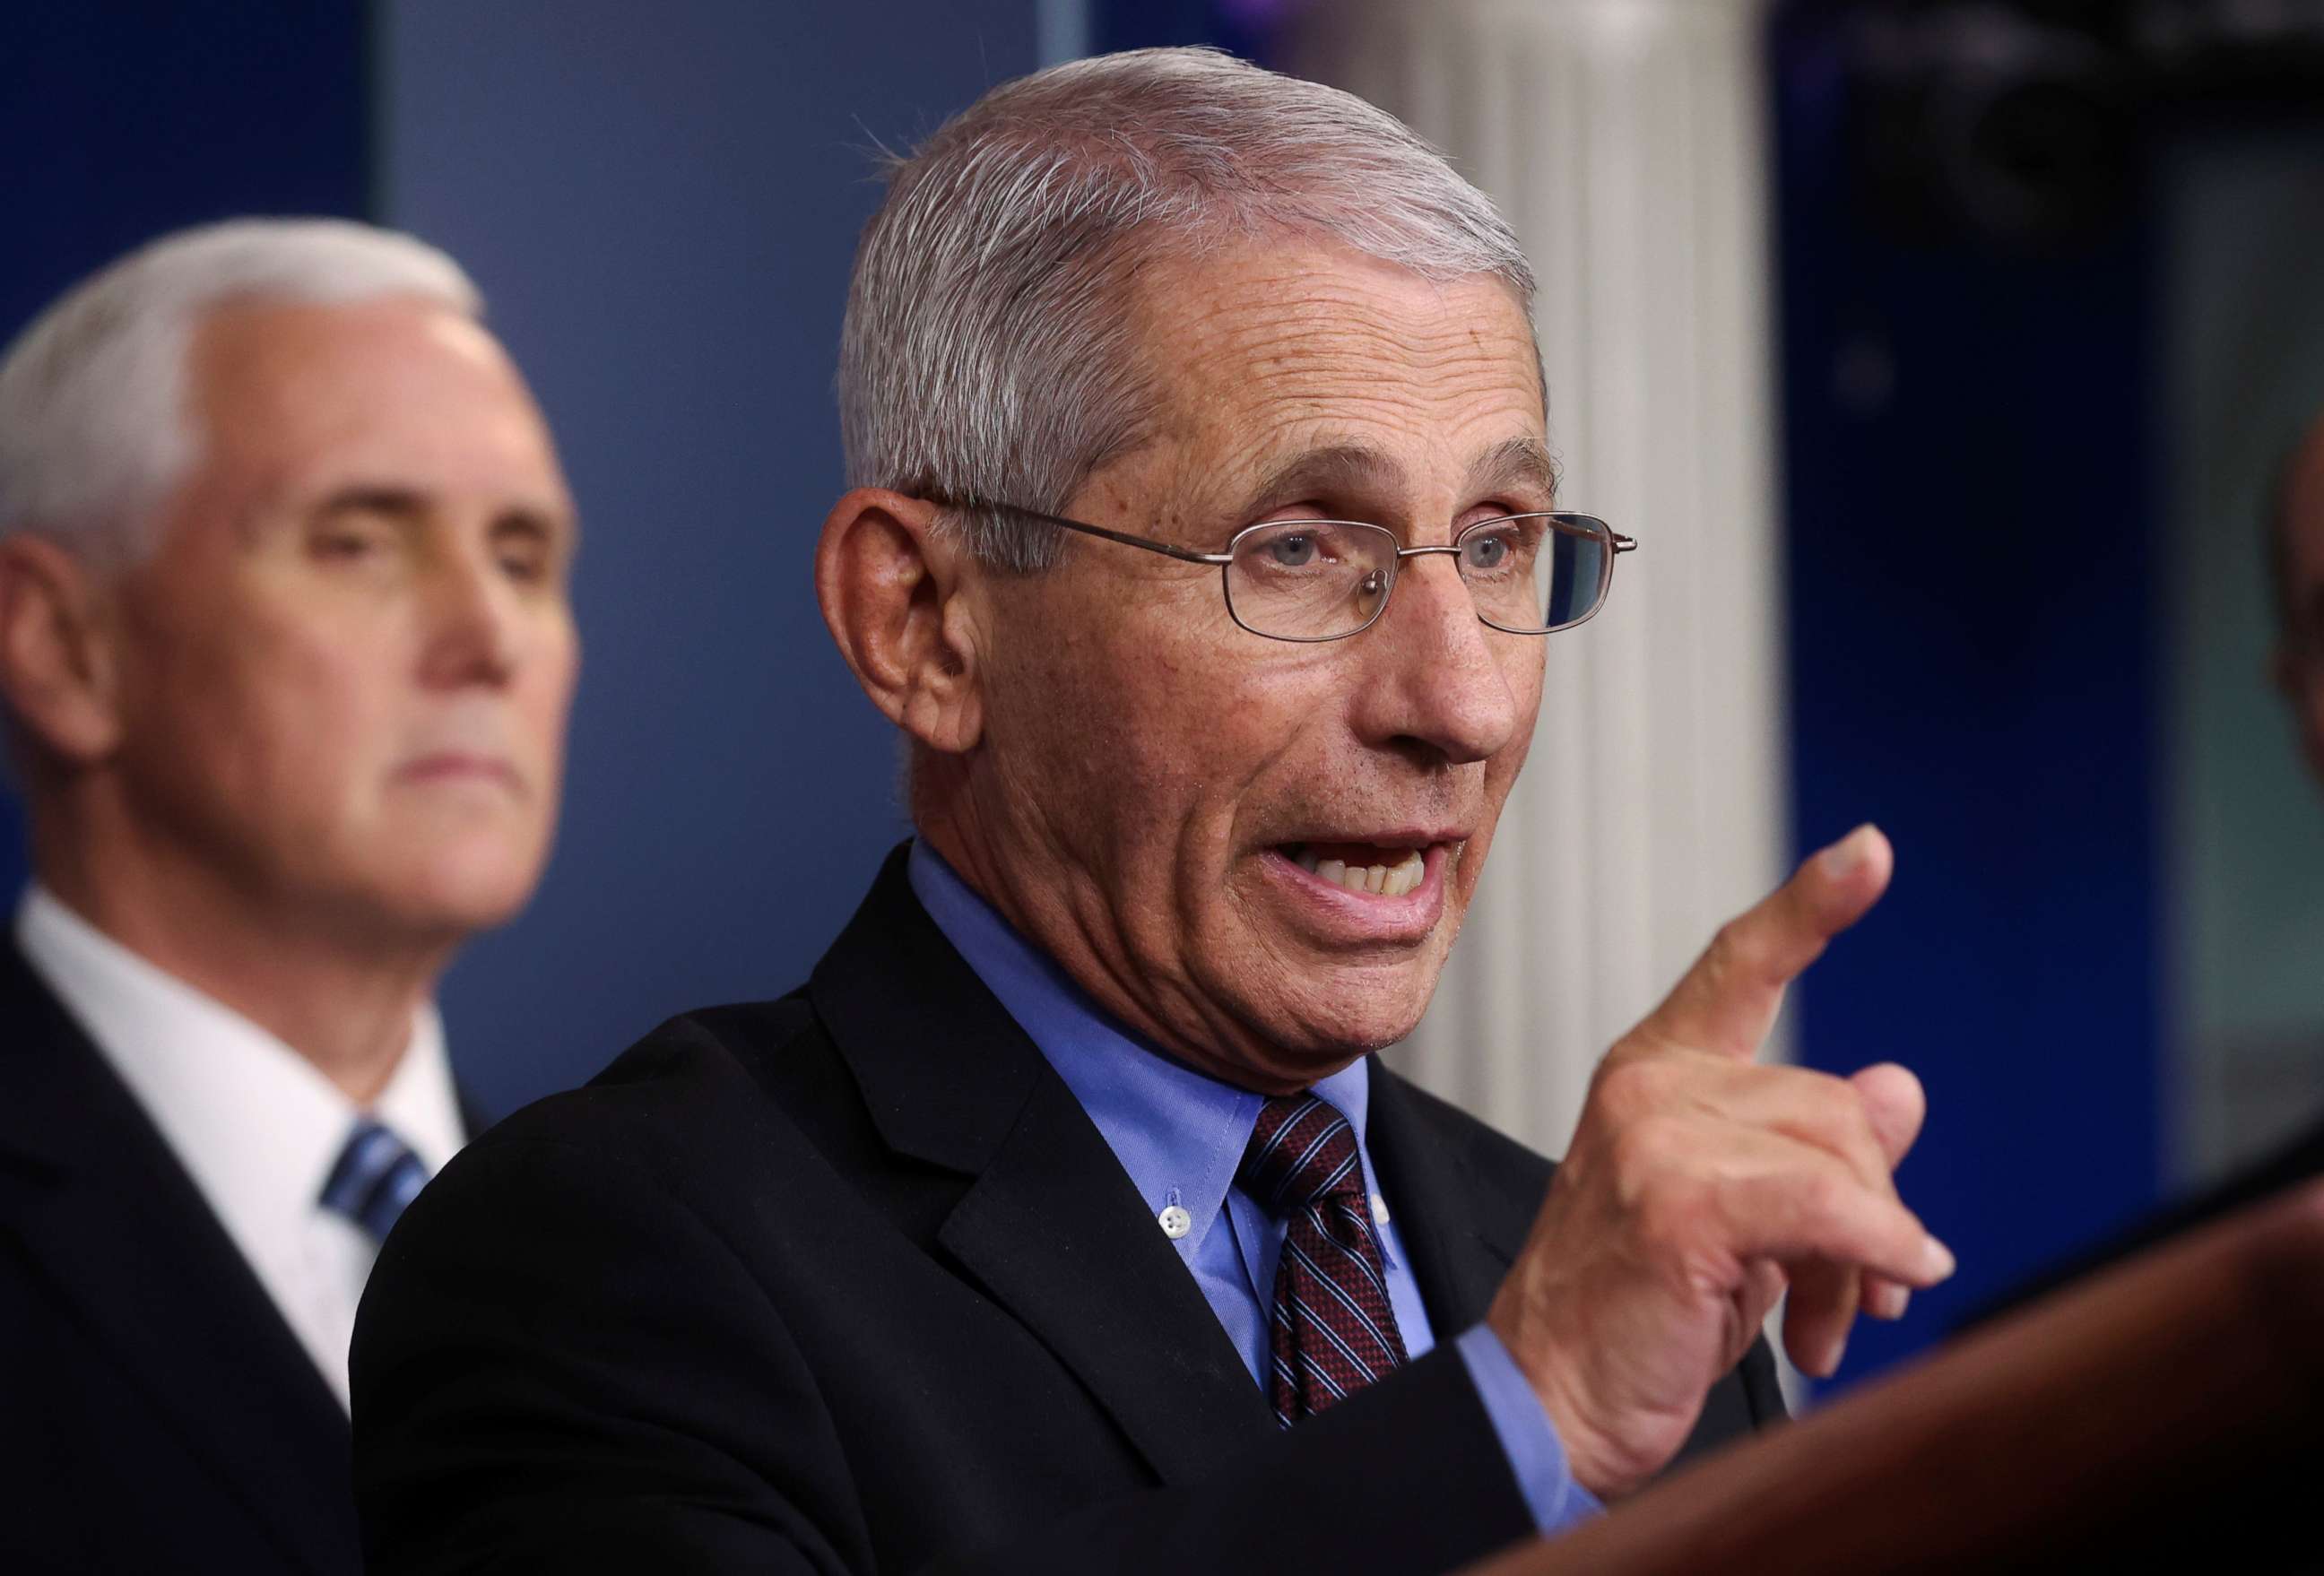 PHOTO: National Institute of Allergy and Infectious Diseases Director Dr. Anthony Fauci answers a question during the daily coronavirus task force briefing as Vice President Mike Pence listens  at the White House in Washington, April 9, 2020.